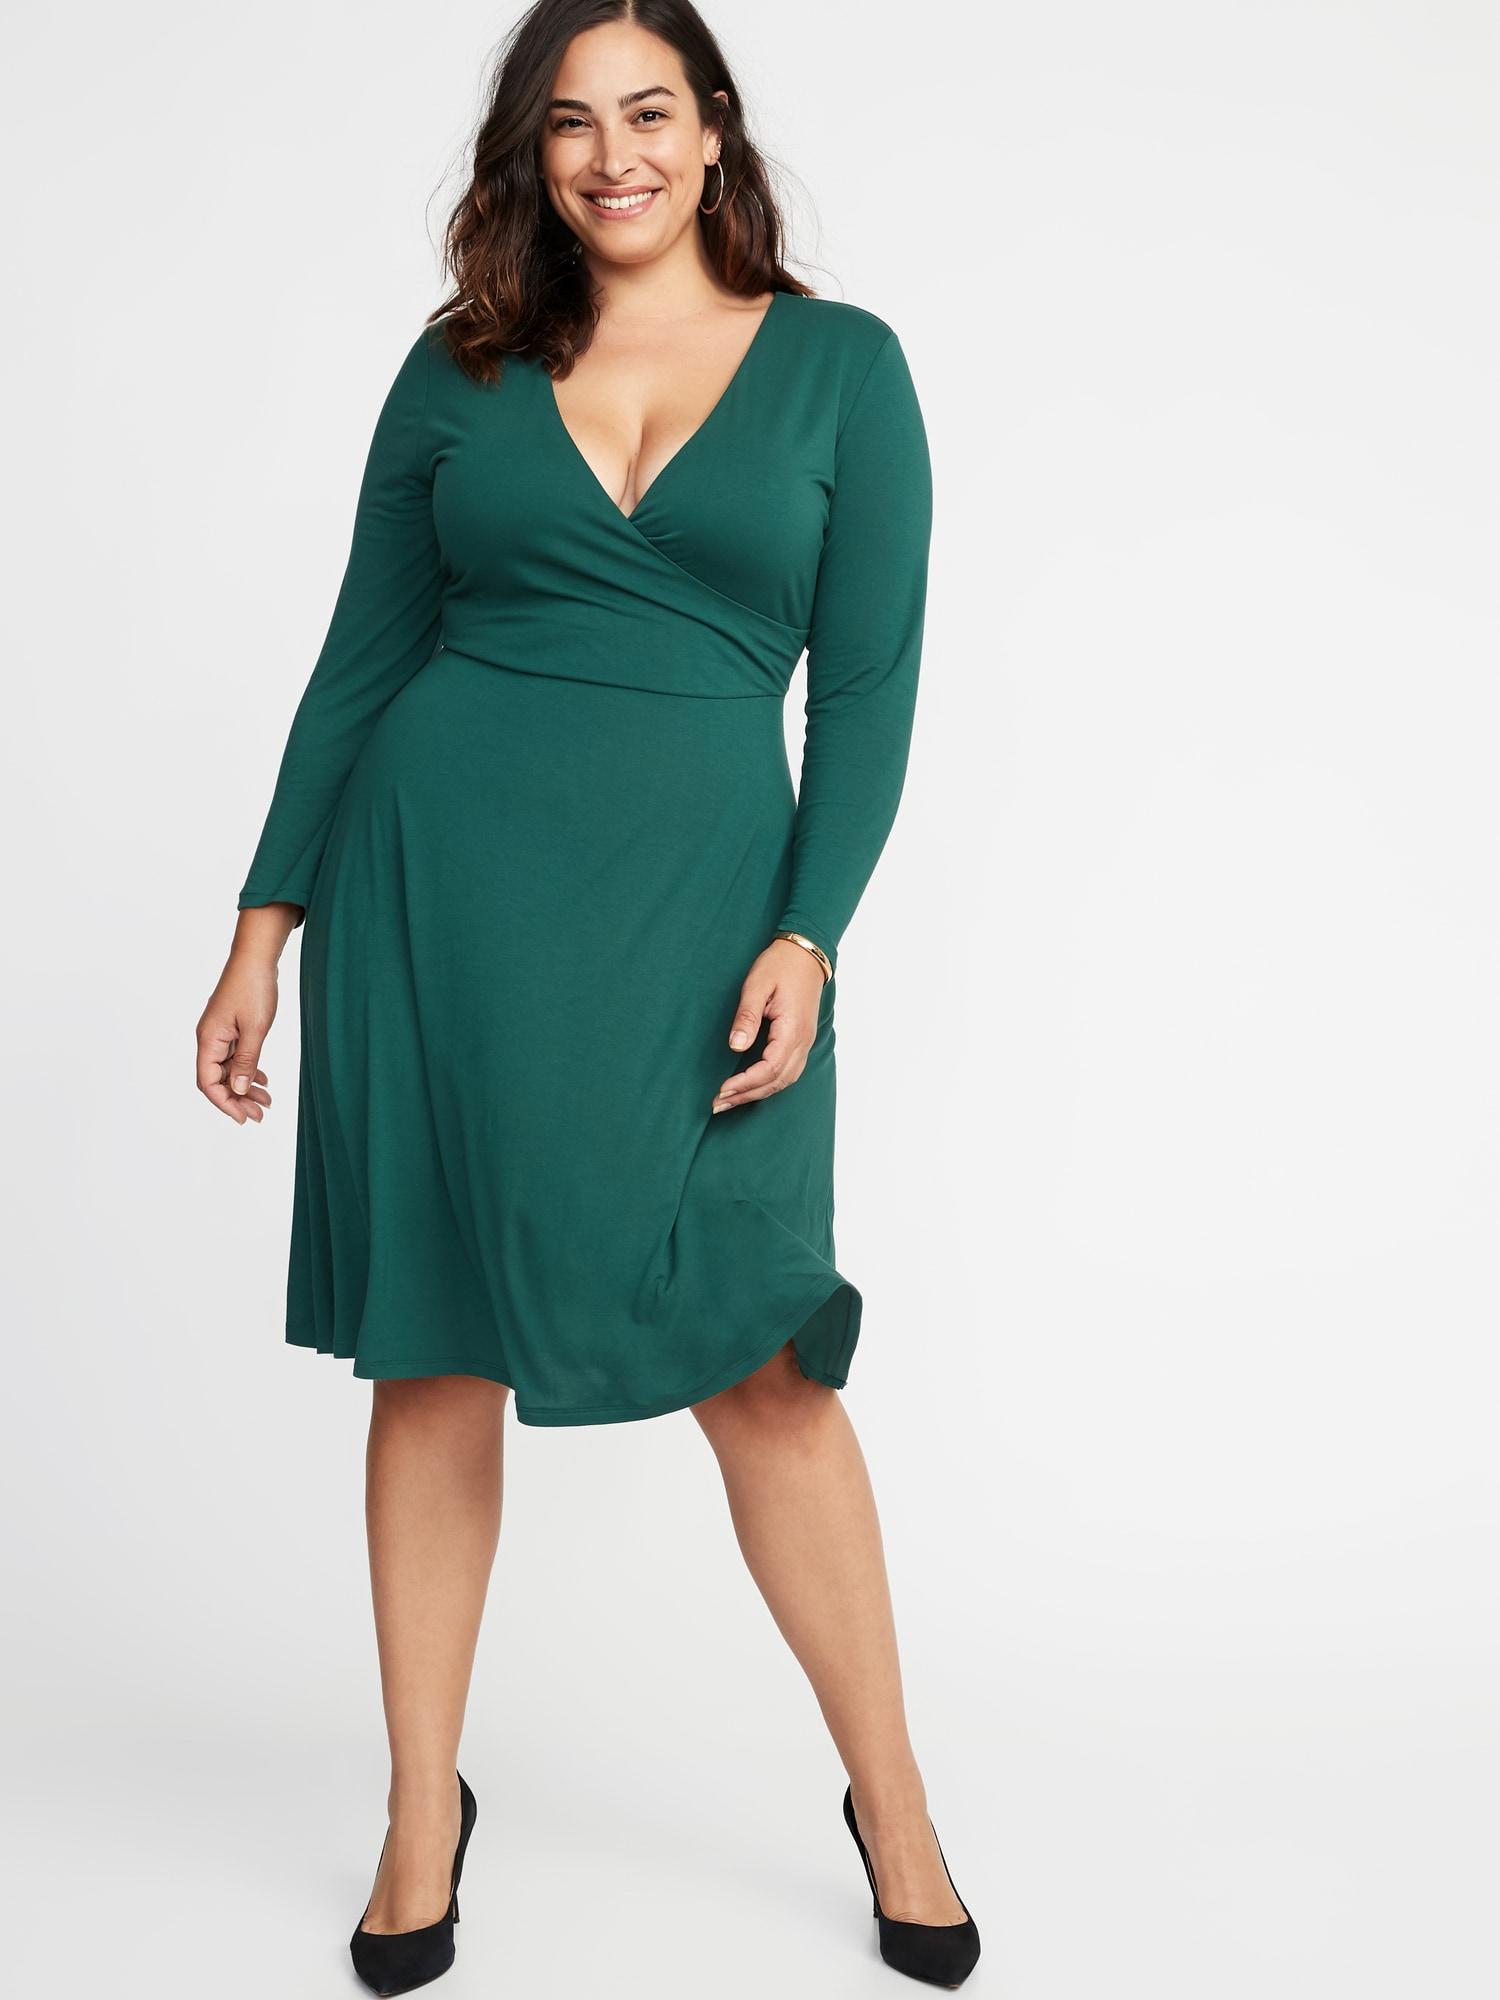 Old Navy Wrap Dress Top Sellers, UP TO 70% OFF | www.aramanatural.es